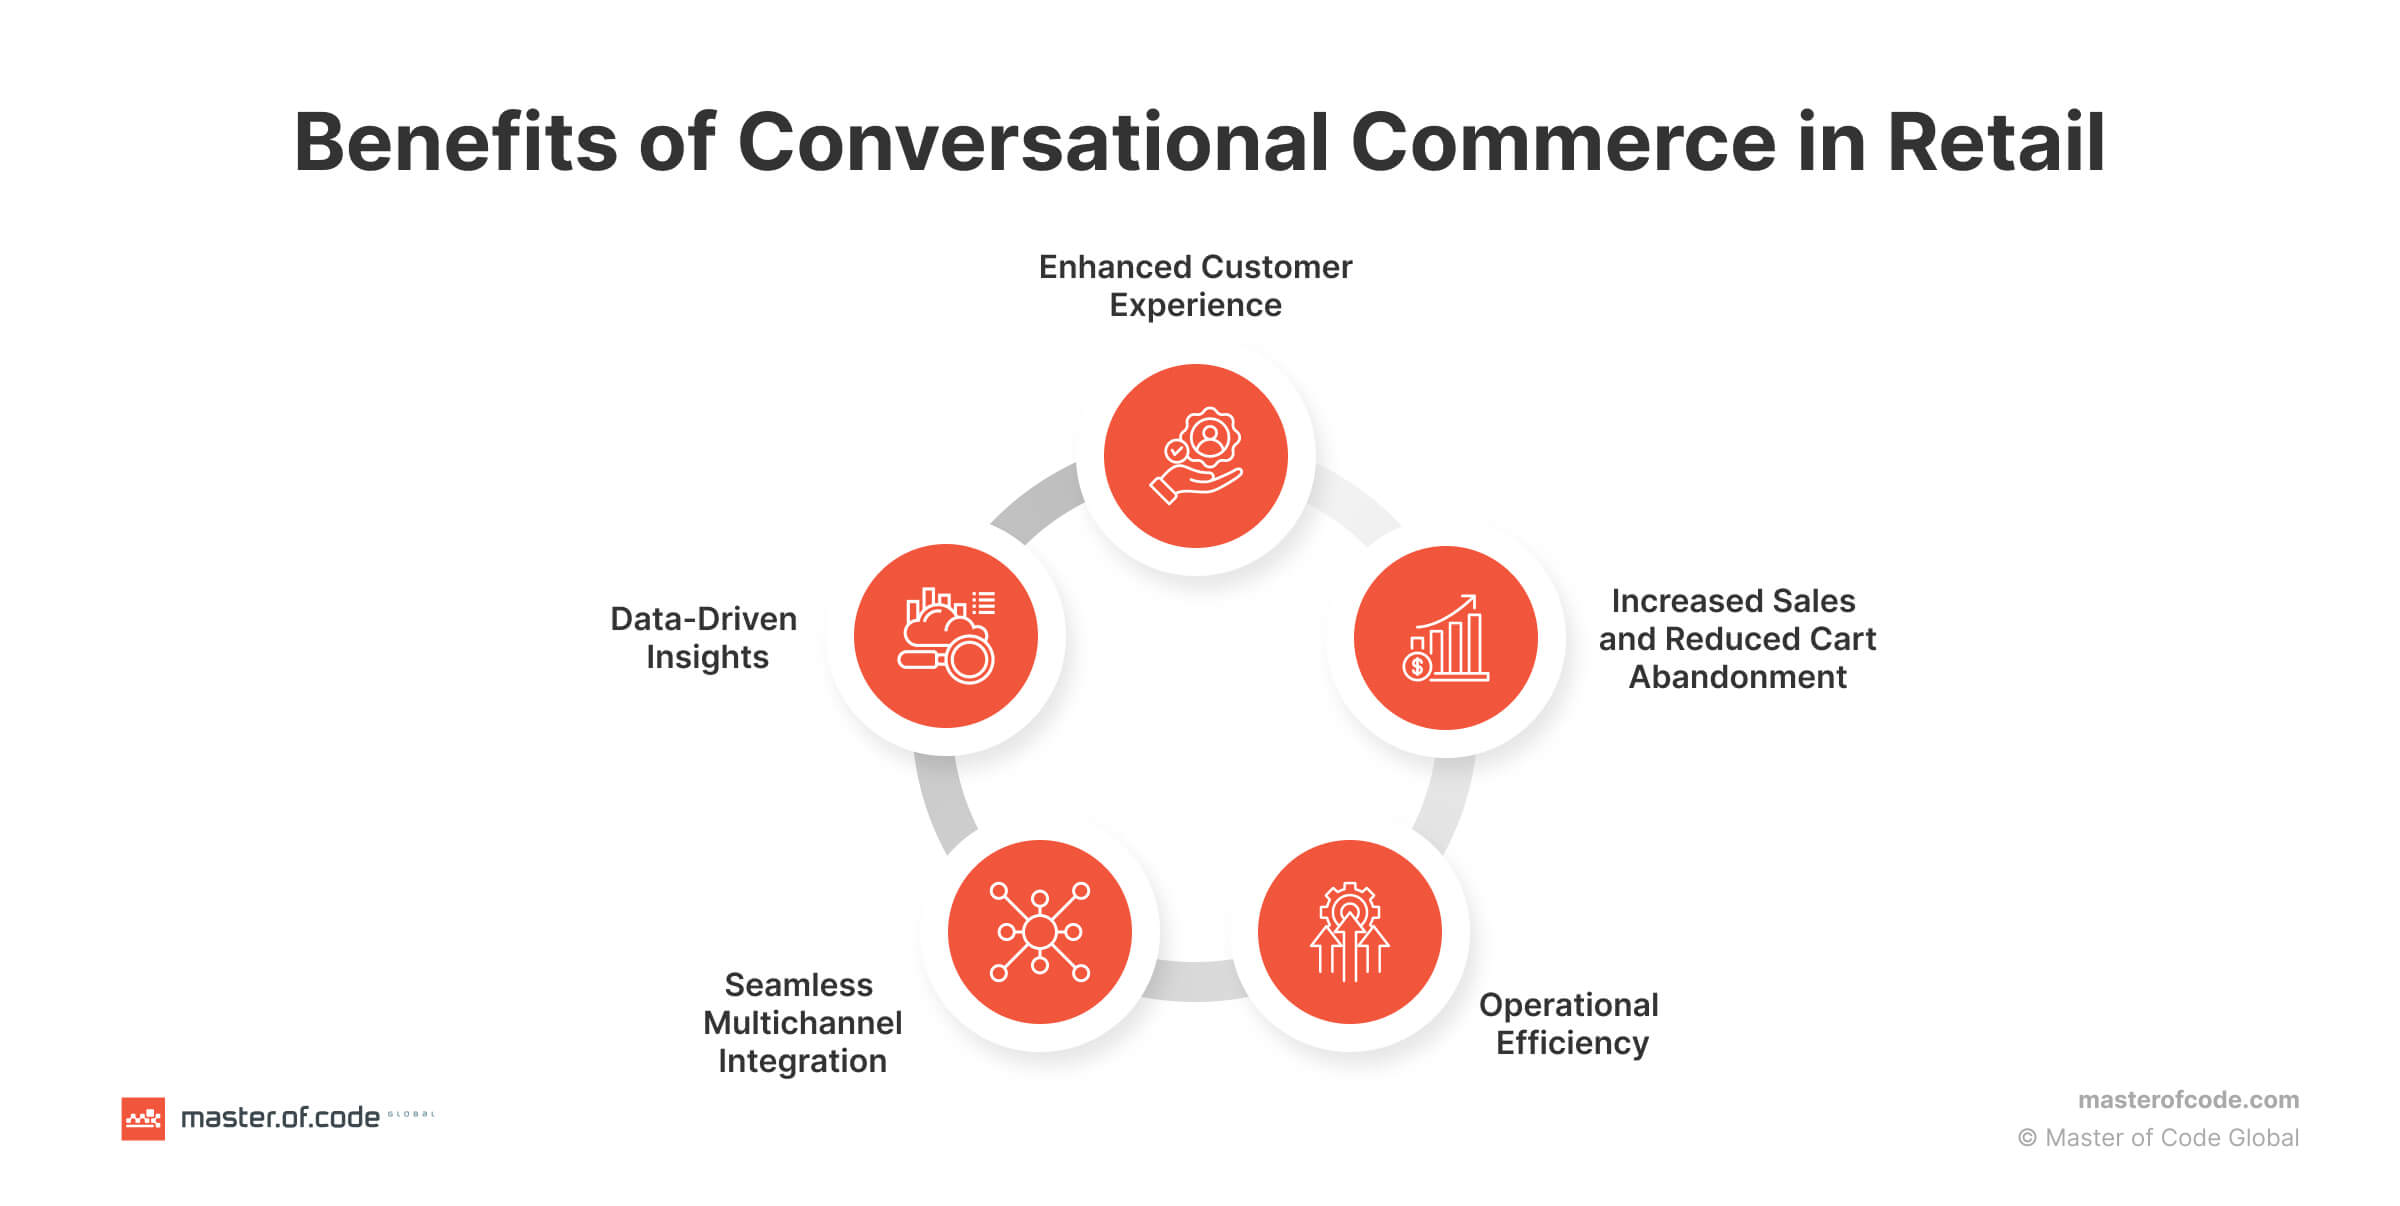 5 Benefits of Conversational Commerce in Retail